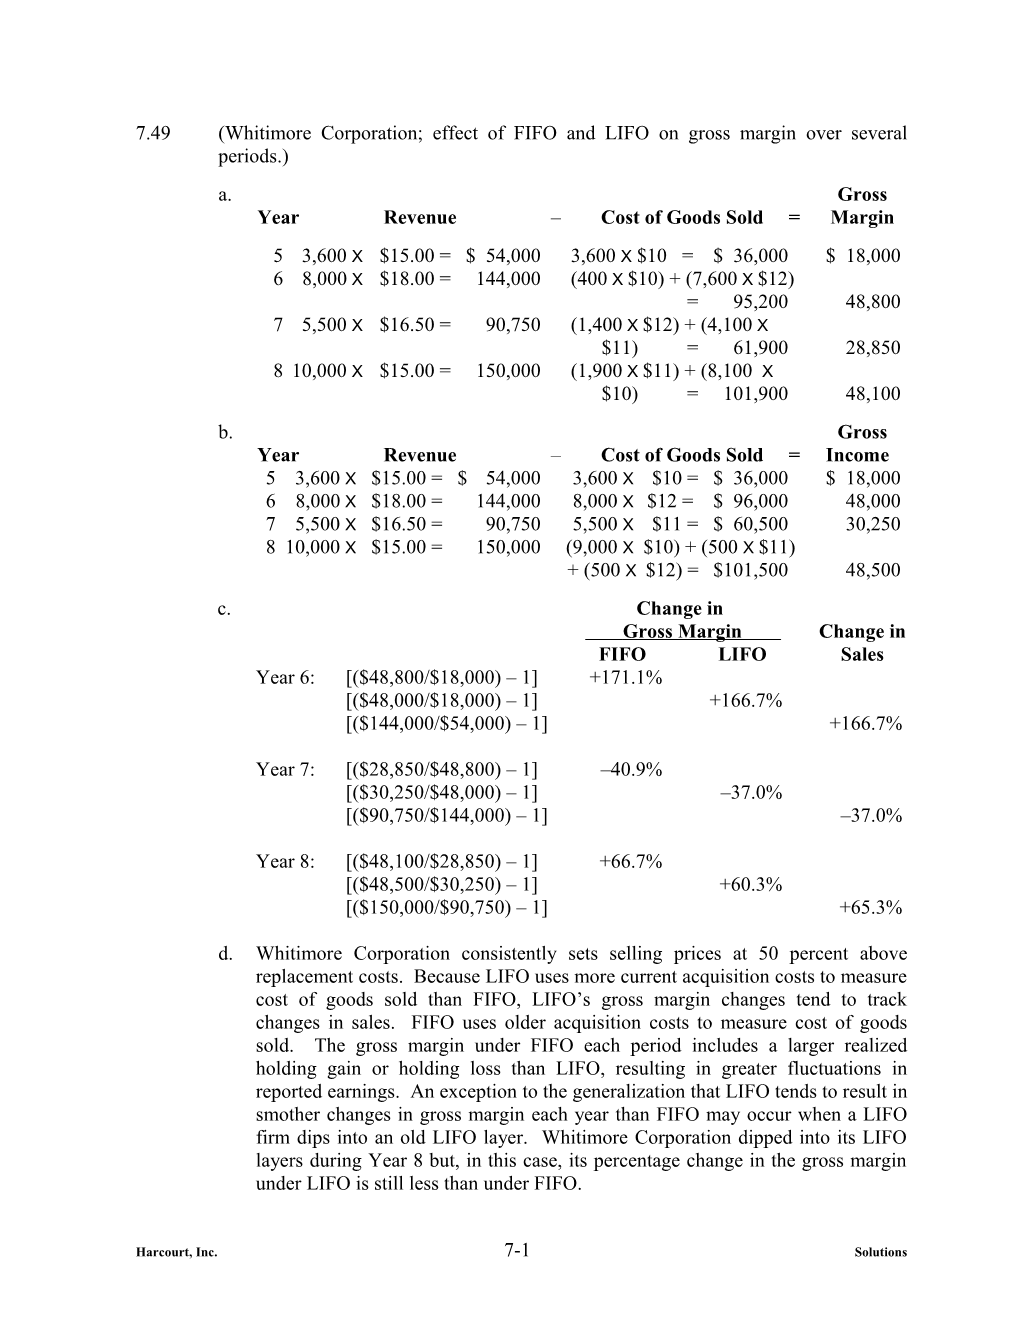 7.49 (Whitimore Corporation; Effect of FIFO and LIFO on Gross Margin Over Several Periods.)